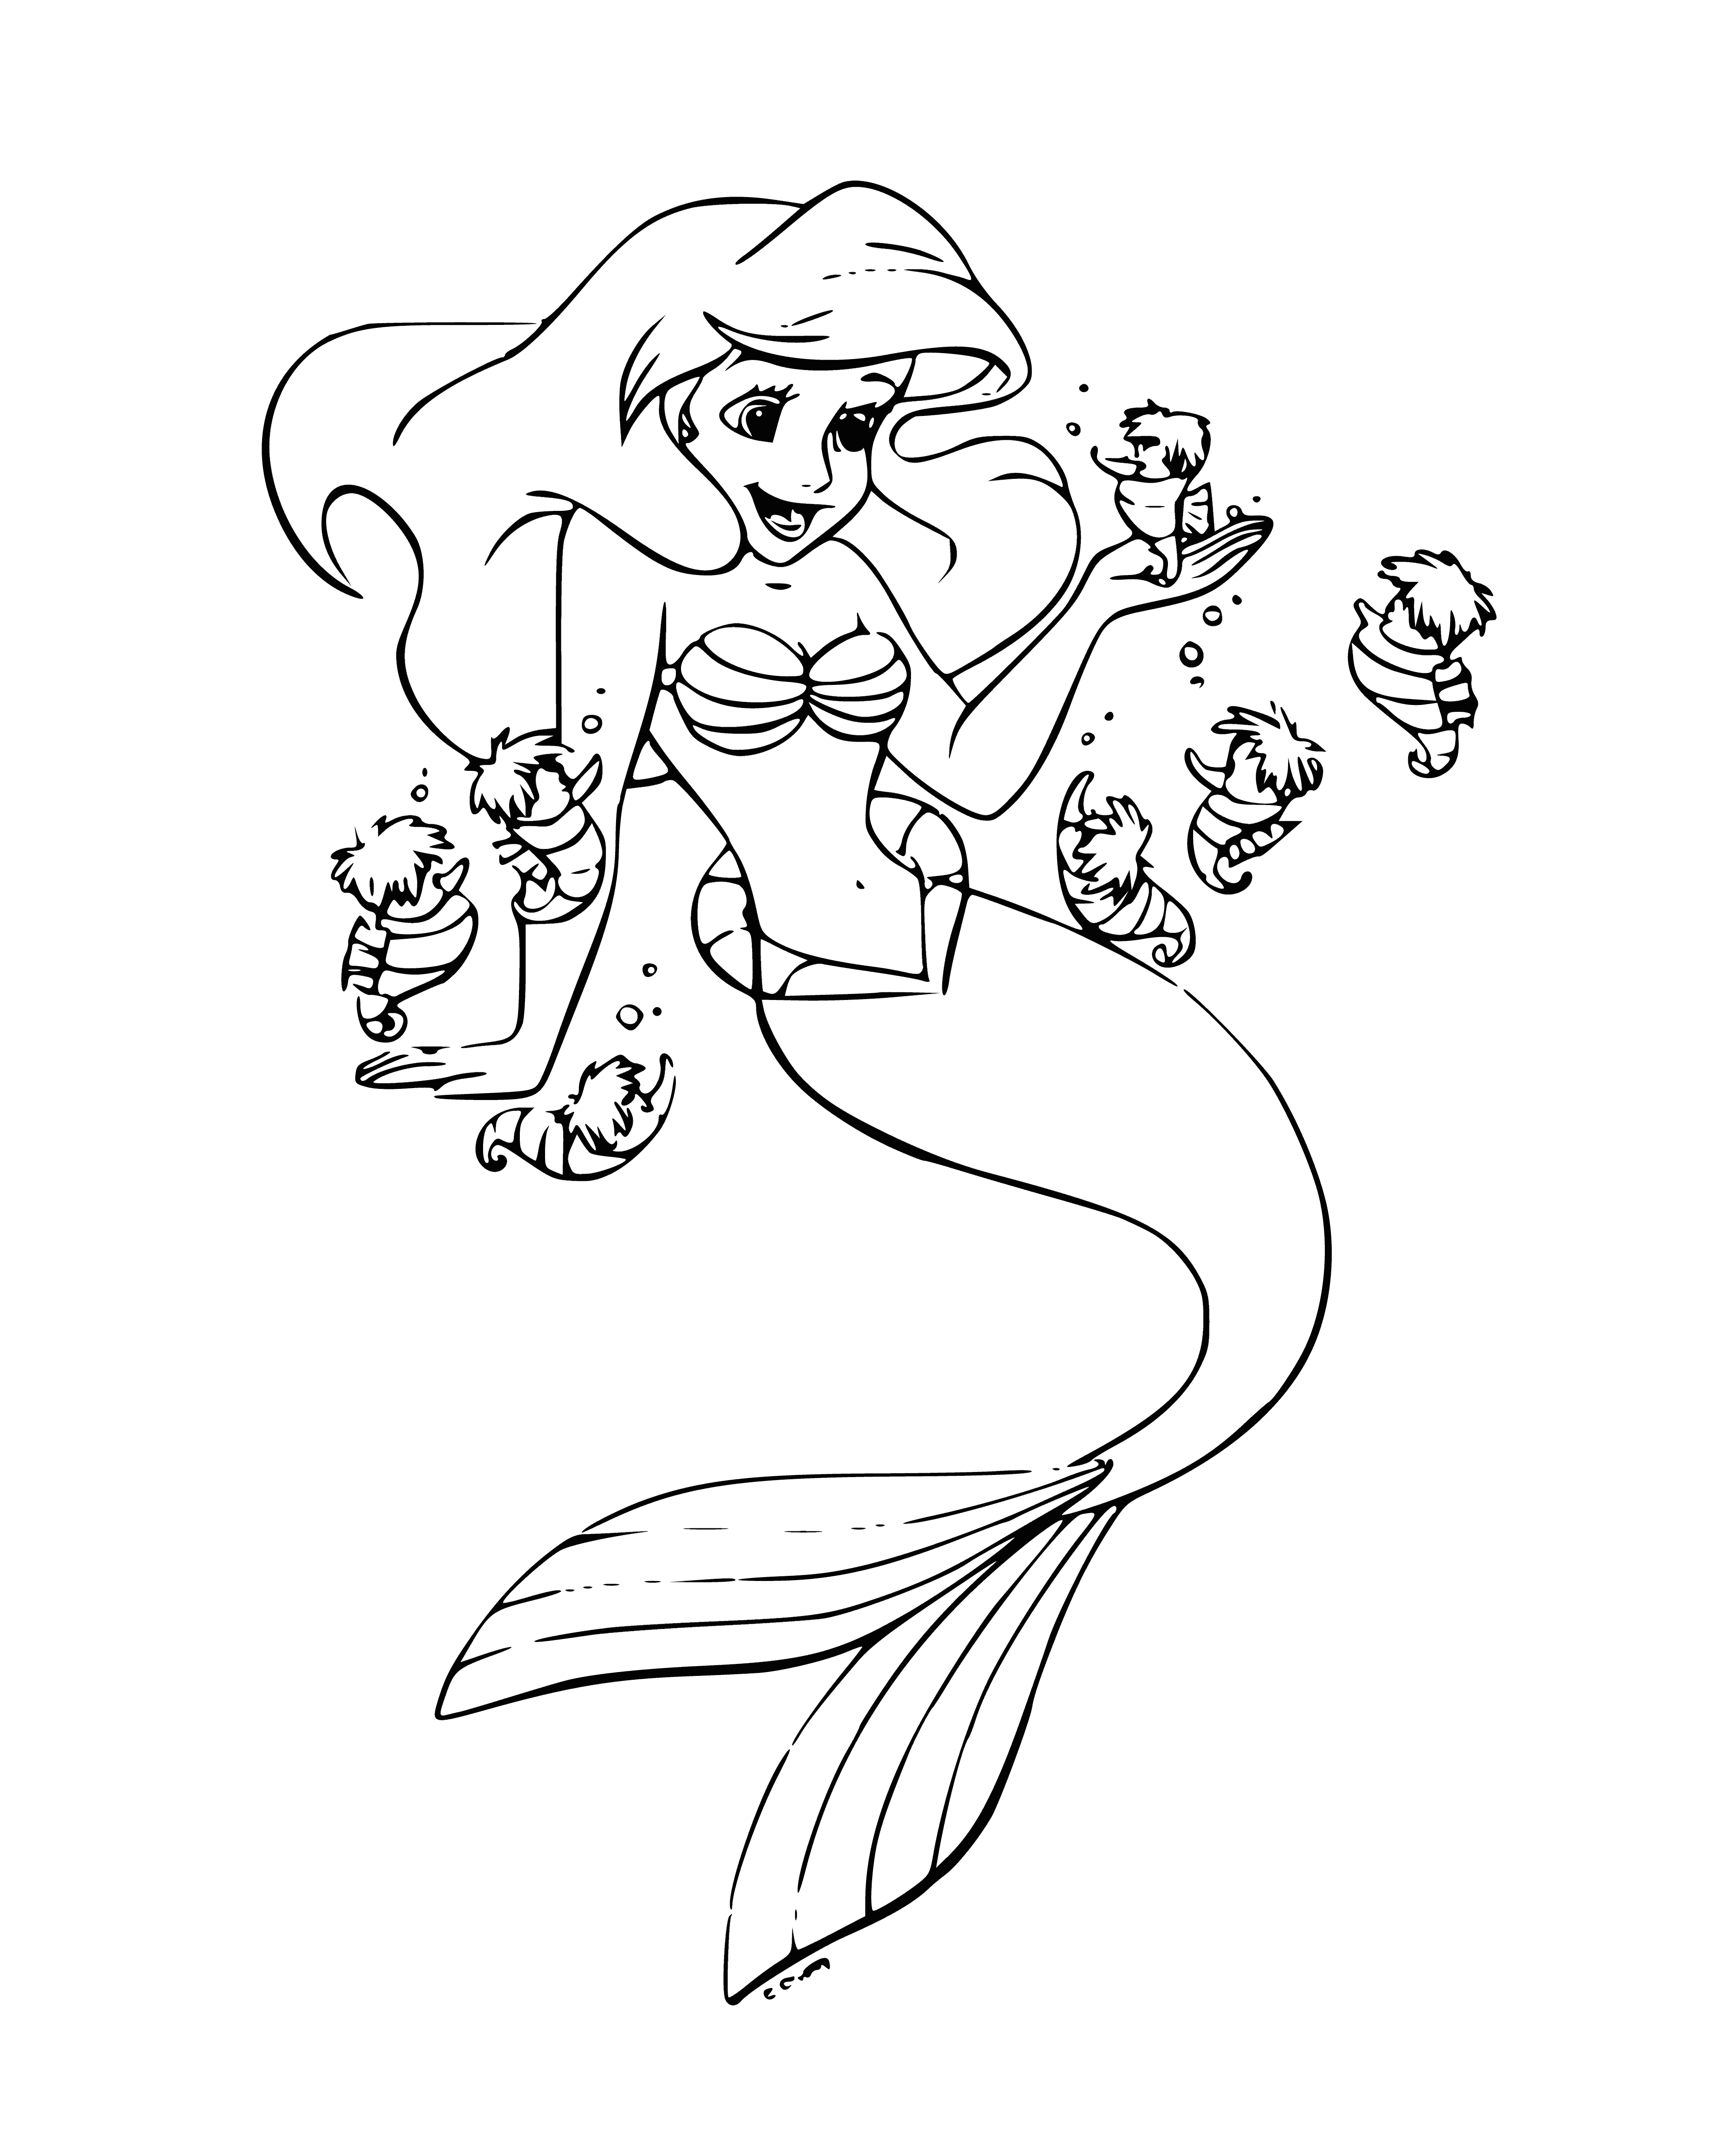 coloring page: Ariel, two seahorses swim with tails up - Ariel's bright blue & purple, friends' green & yellow - deep blue background. #Disney #TheLittleMermaid